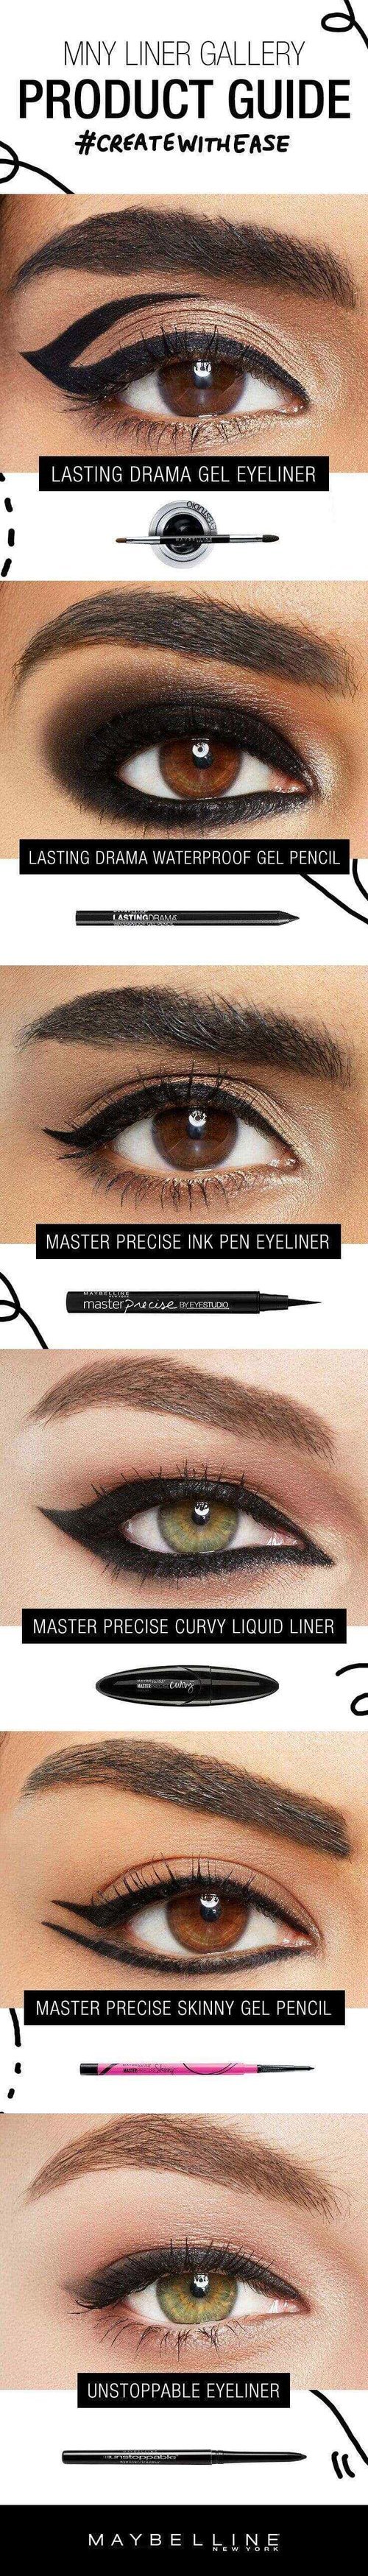 My Liner Gallery - Product Guide